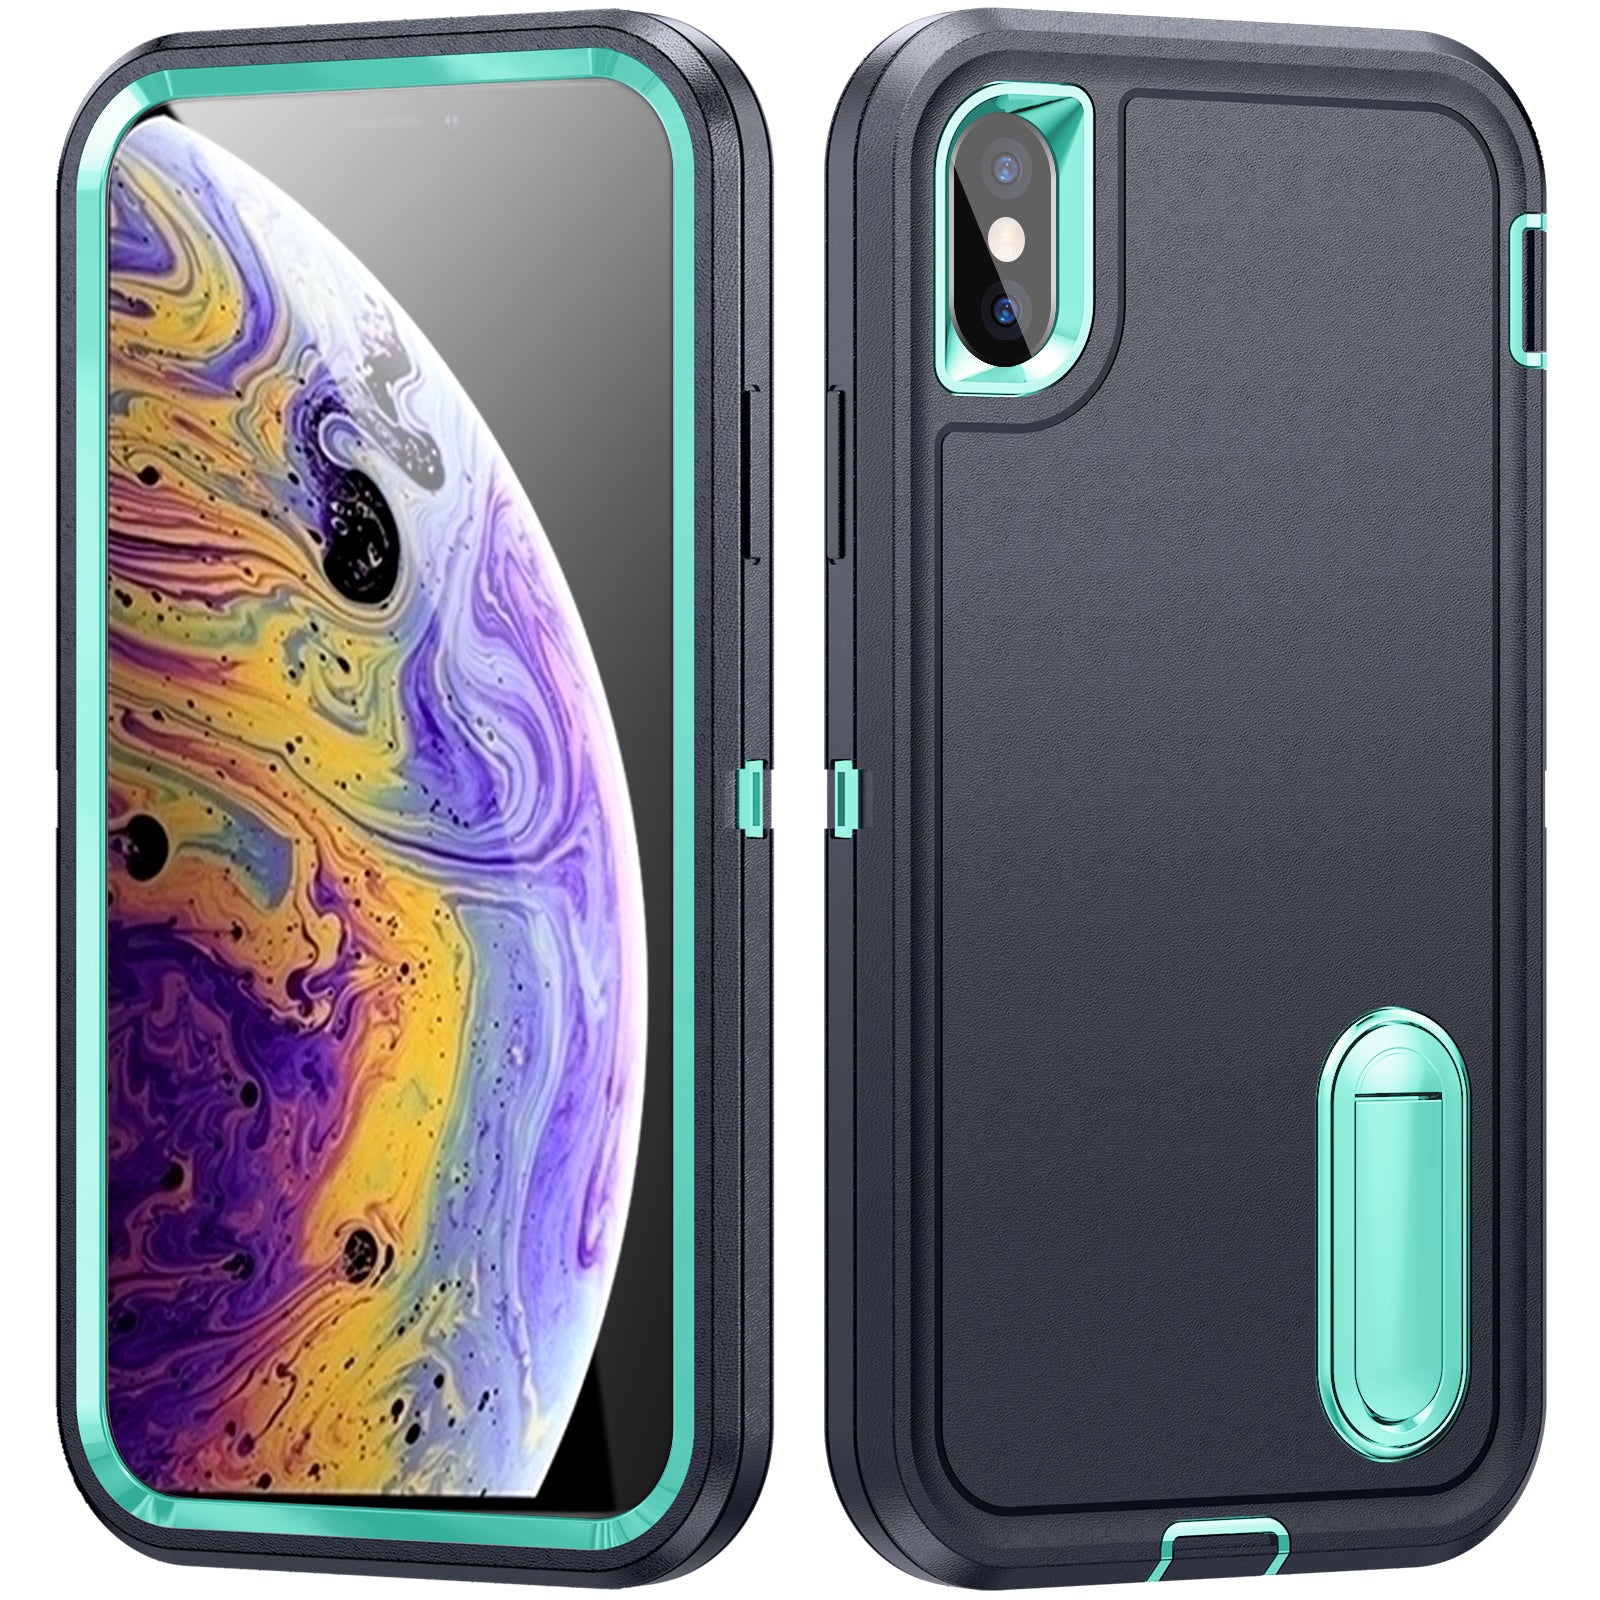 Kickstand anti-dropProtection Case for iPhone X/XS